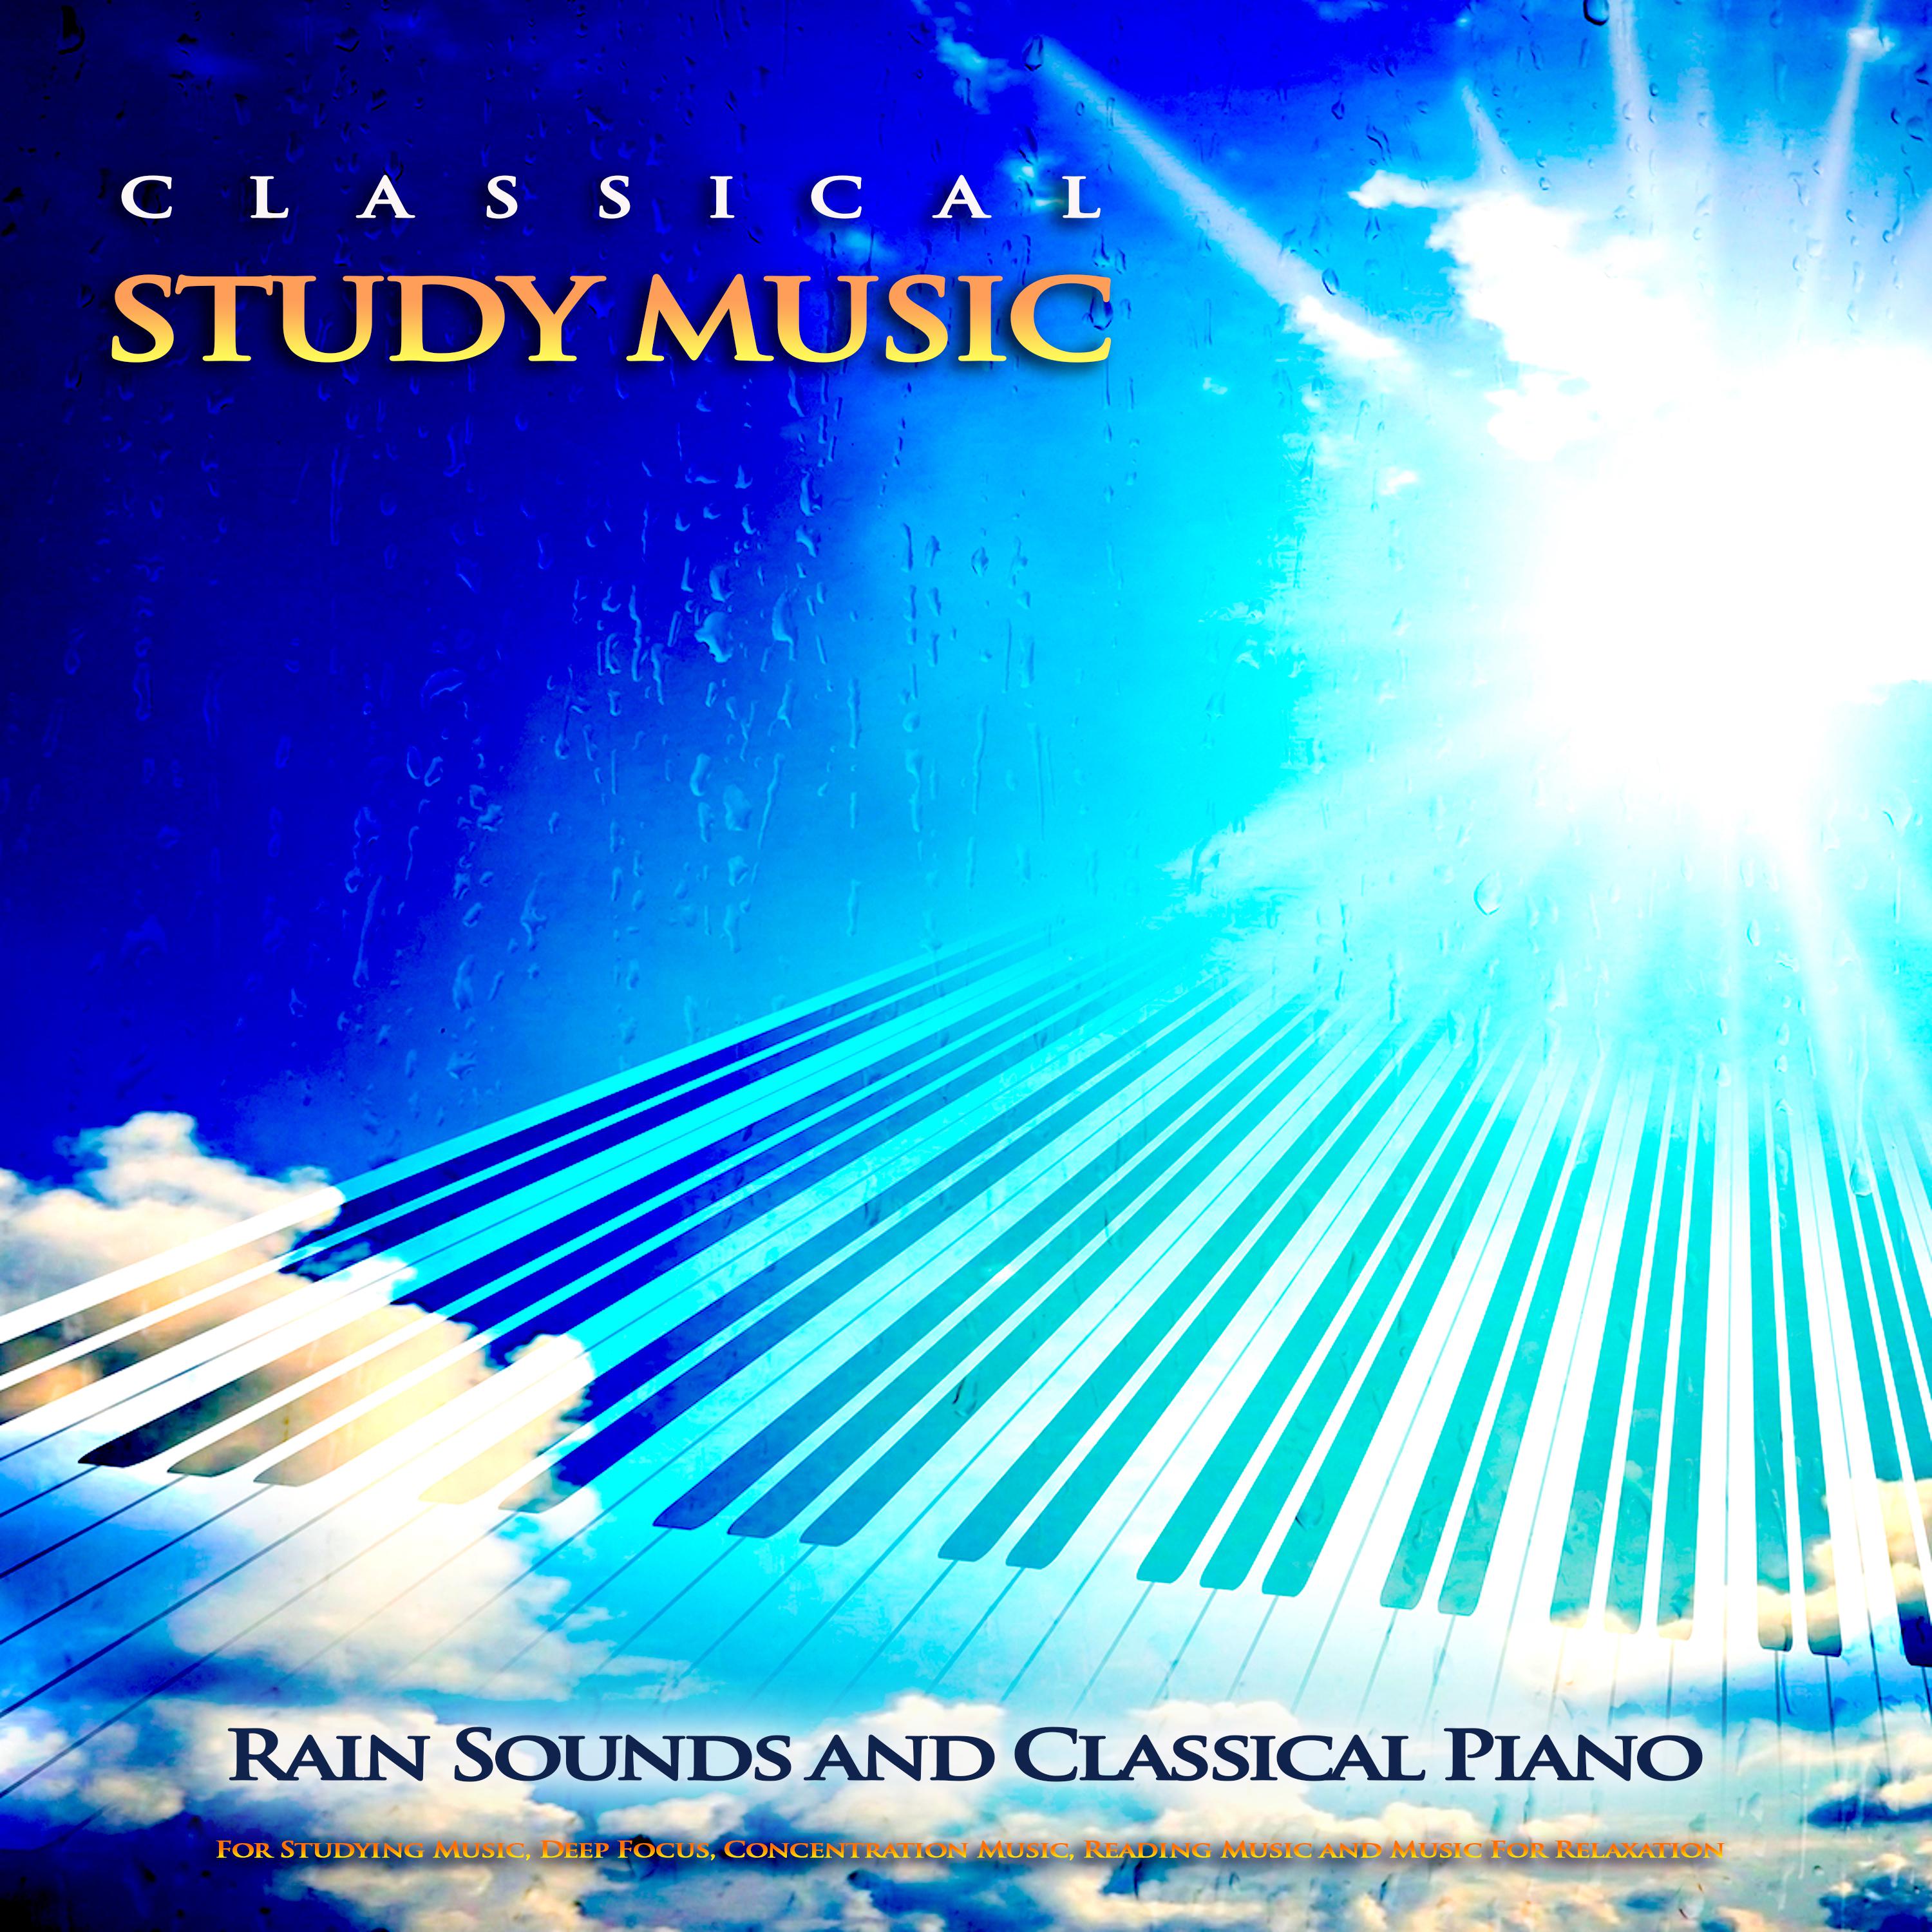 Des Abends - Schumann - Classical Piano Music and Rain Sounds - Classical Study Music